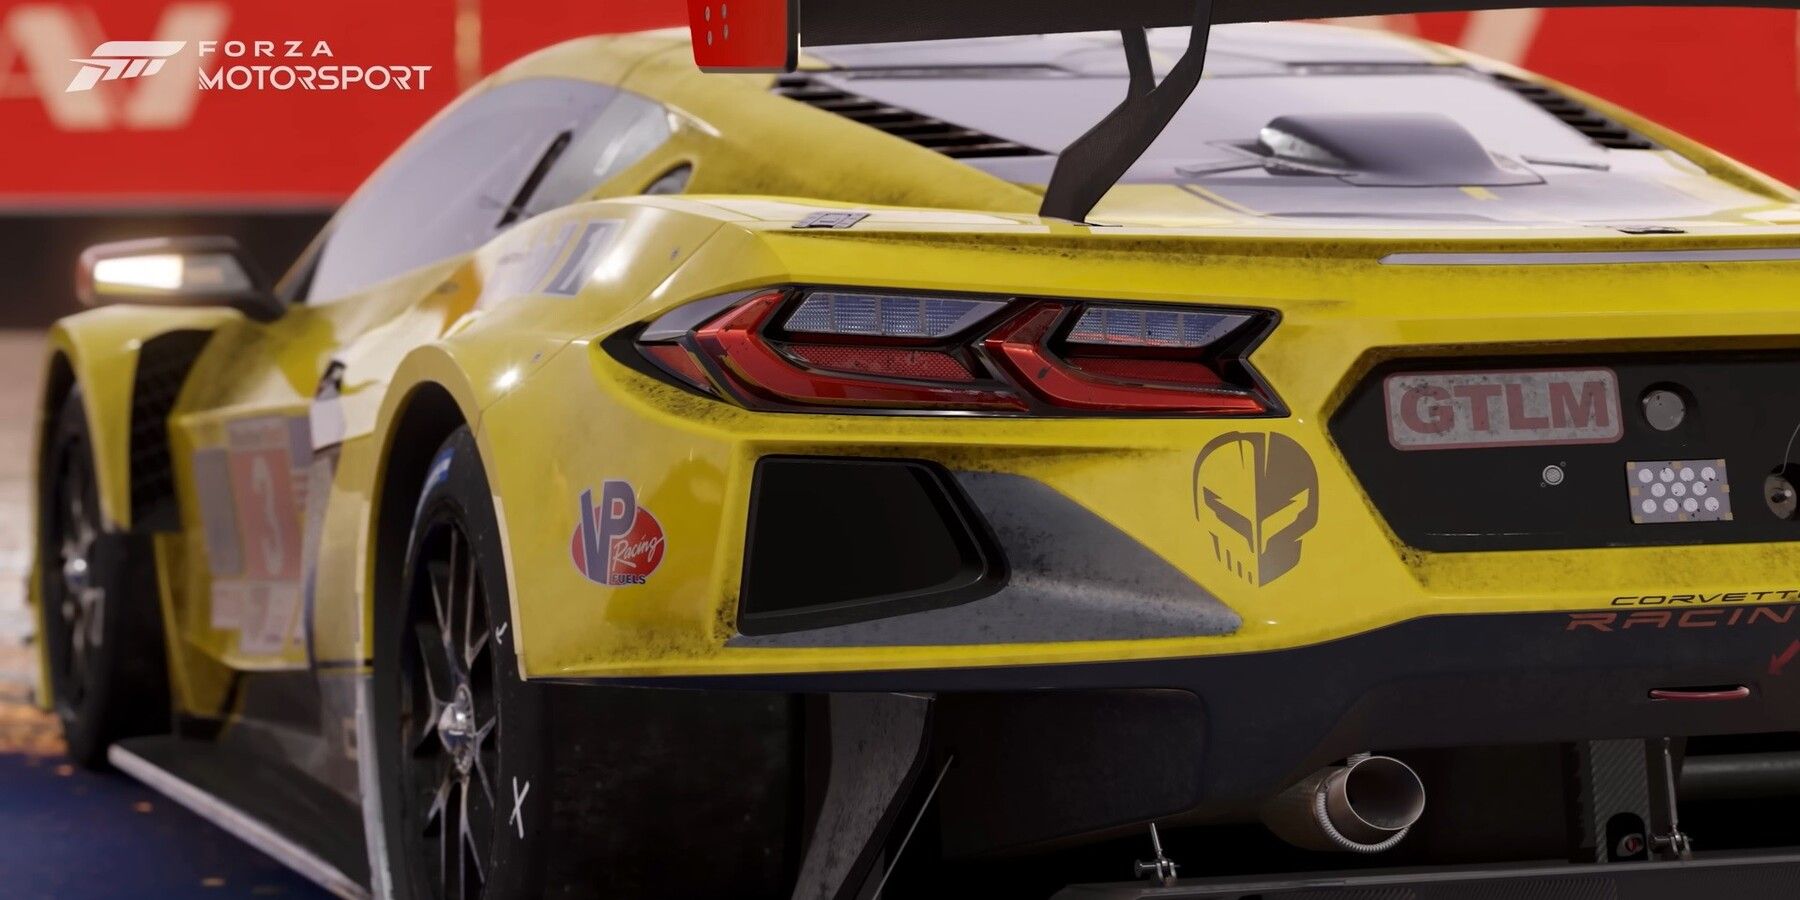 The All-New Forza Motorsport is the Most Technically Advanced